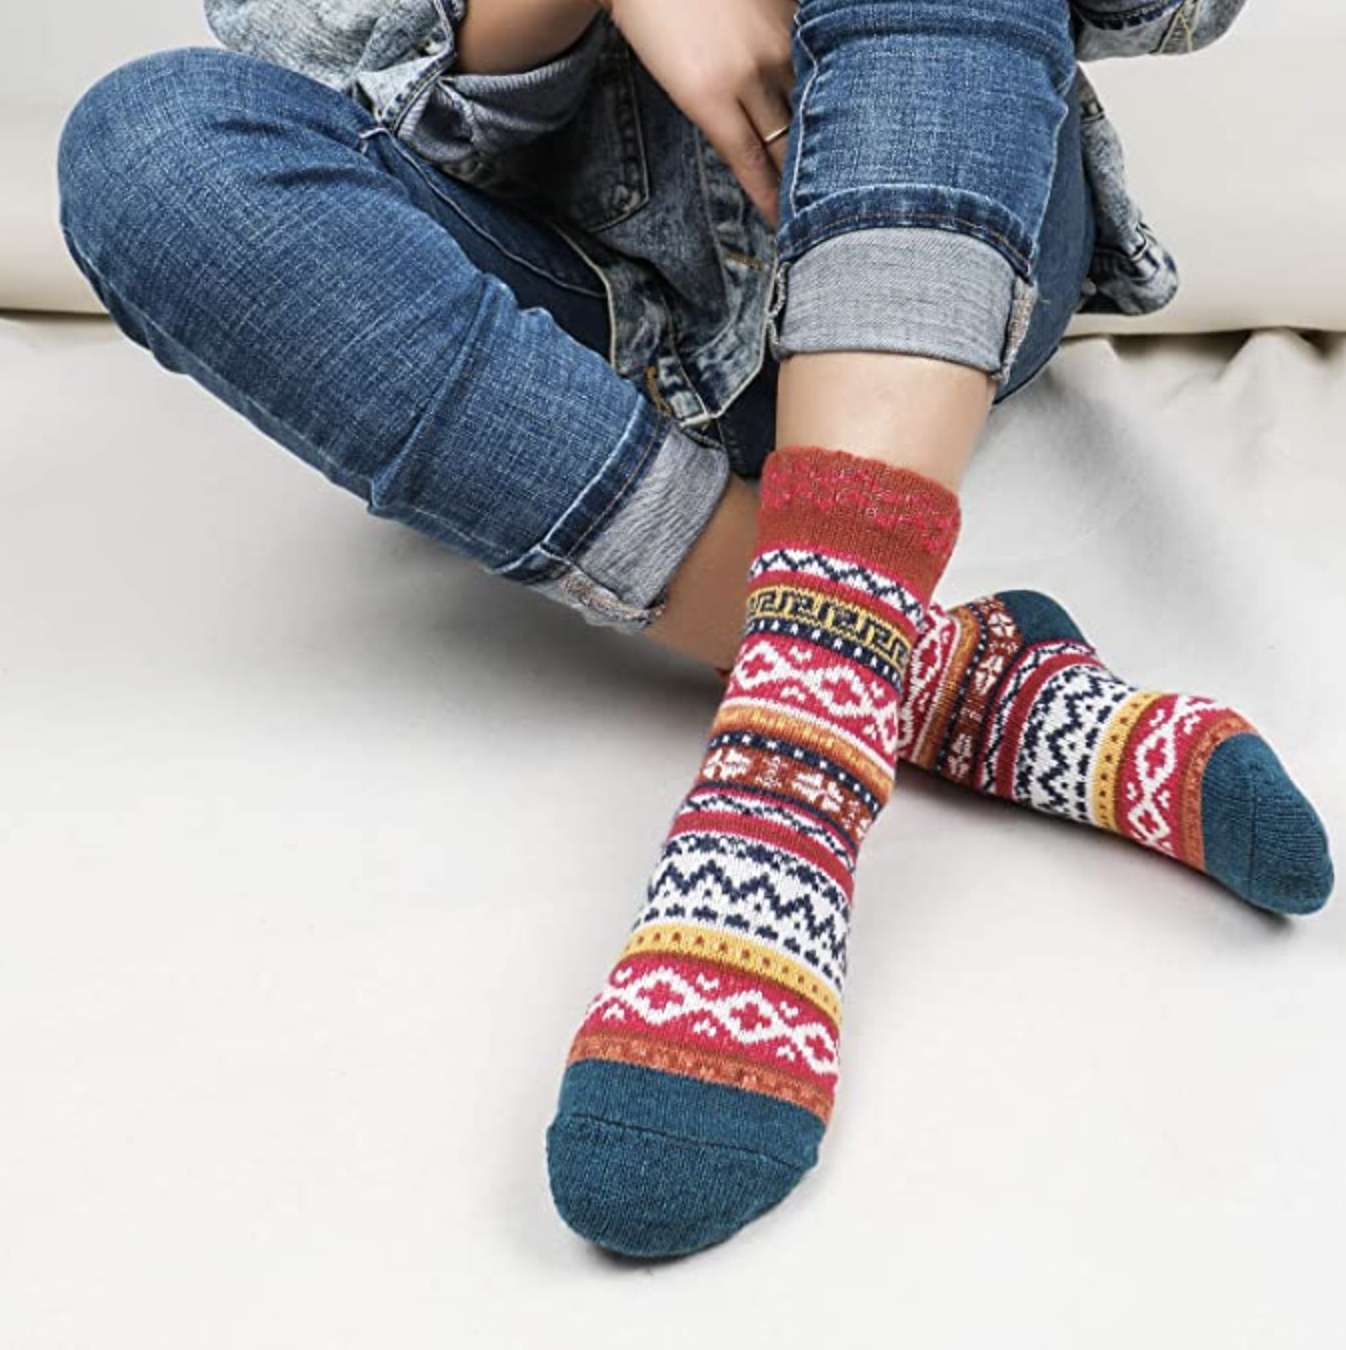 A person wearing a pair of patterned socks with jeans